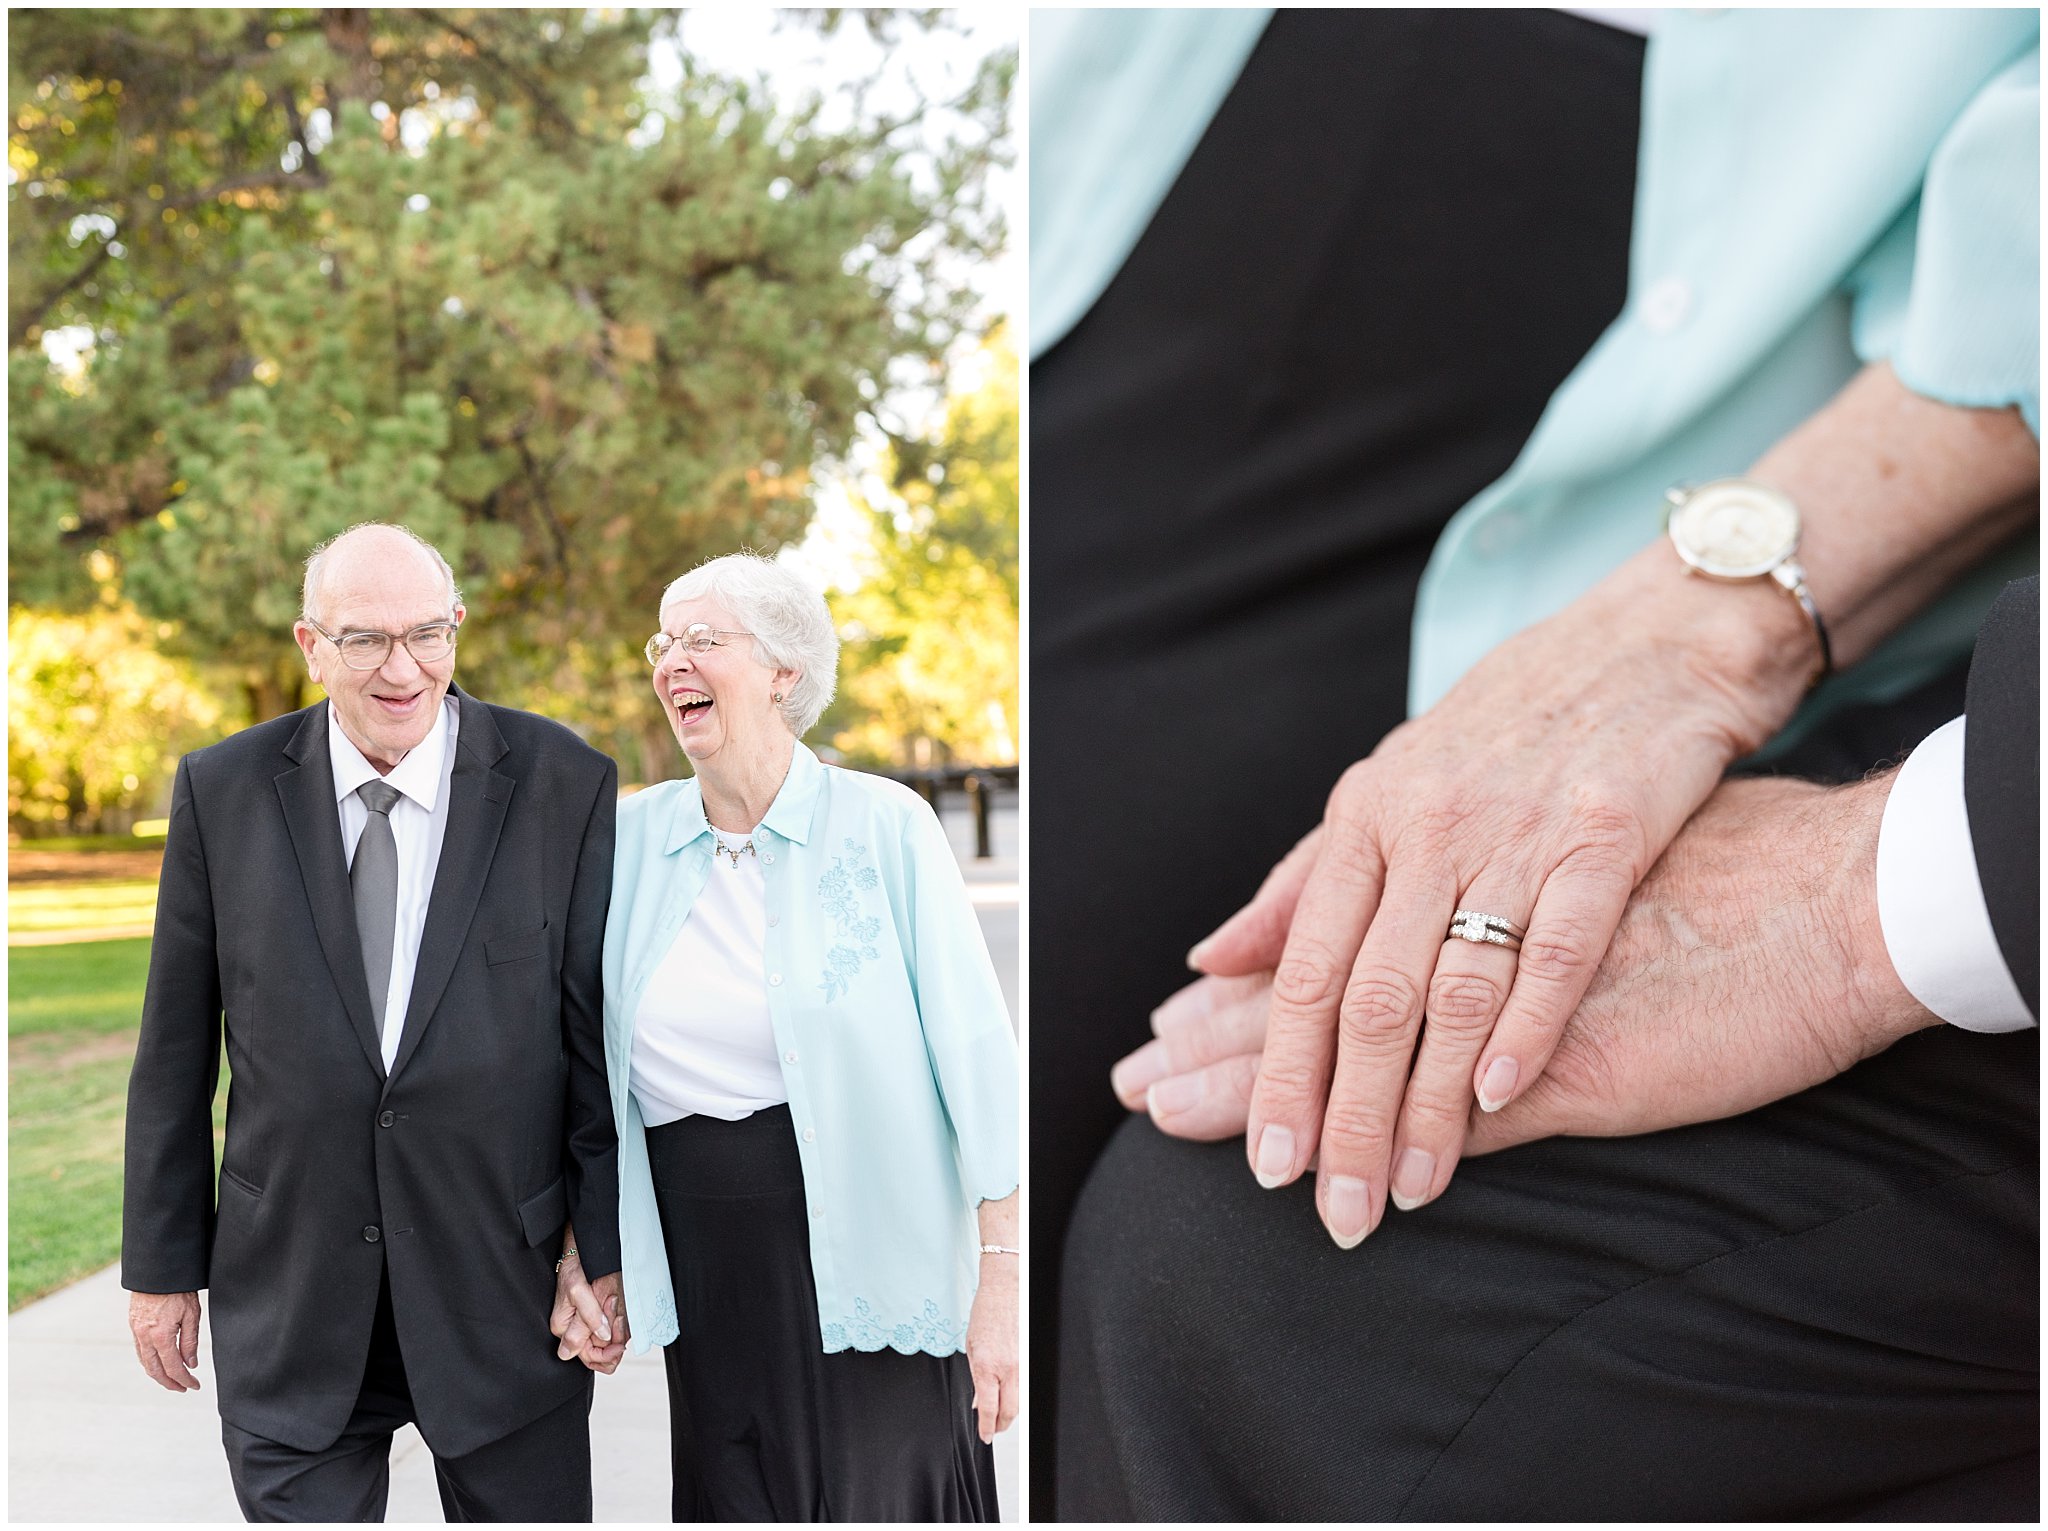 Grandparents laughing during photoshoot and picture holding hands | Layton Commons Park | Layton Couples Photographer | Jessie and Dallin